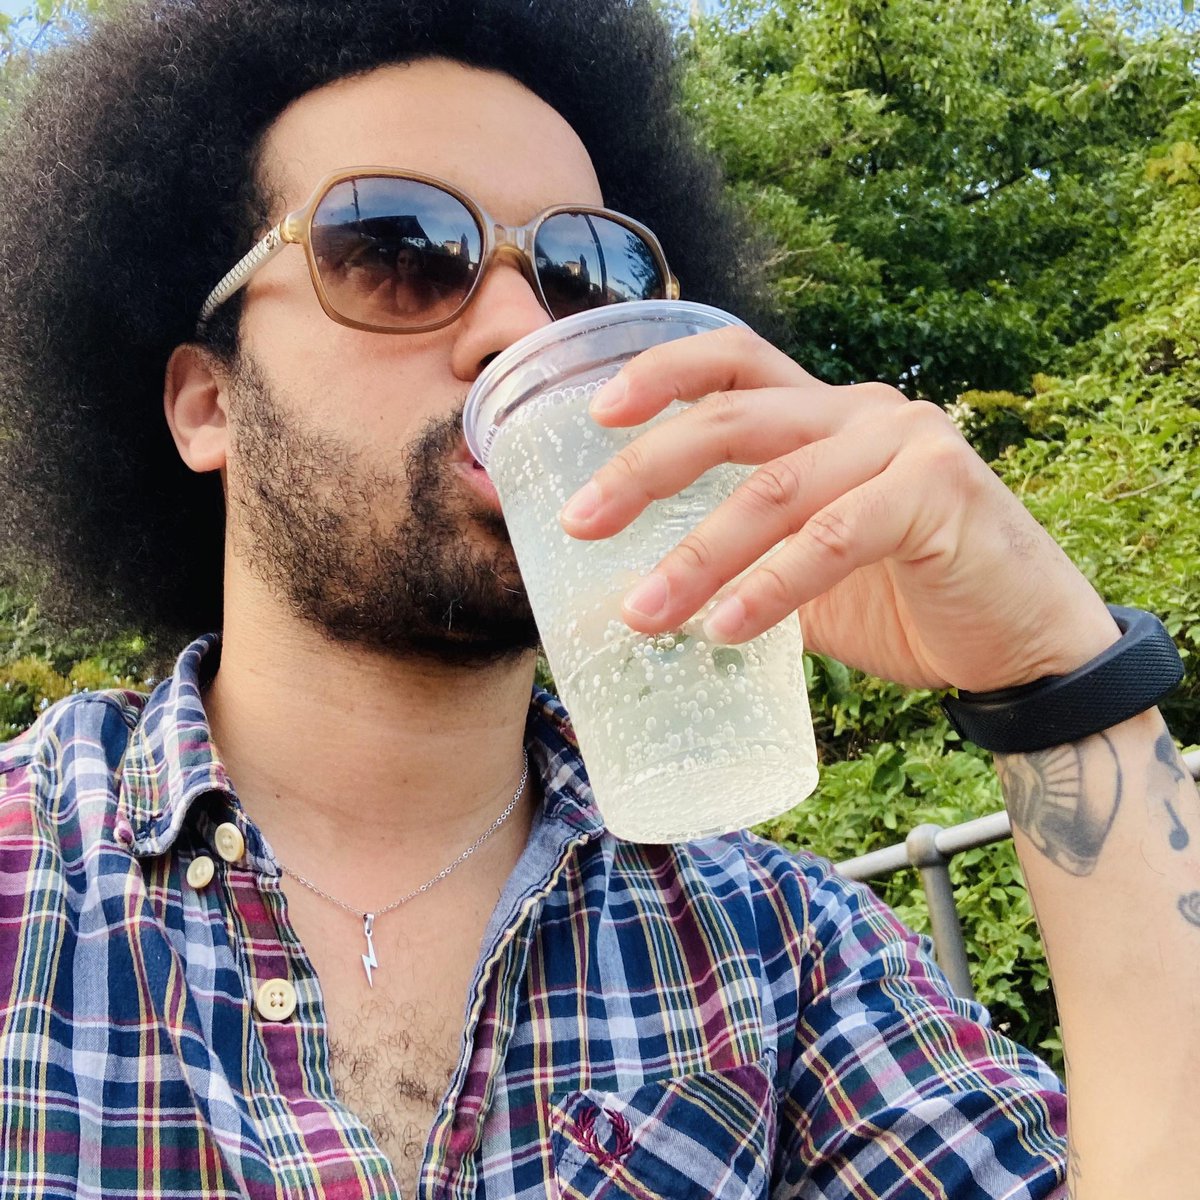 Having a small break from music production to enjoy some of the famous Yorkshire sunshine! Rest assured there is plenty of new Flash Cassette music on the way that I can't wait to share with you all! 
⚡️📼

#Summer #Cider #Bradford #Synthwave #futurefunk
#Newmusic